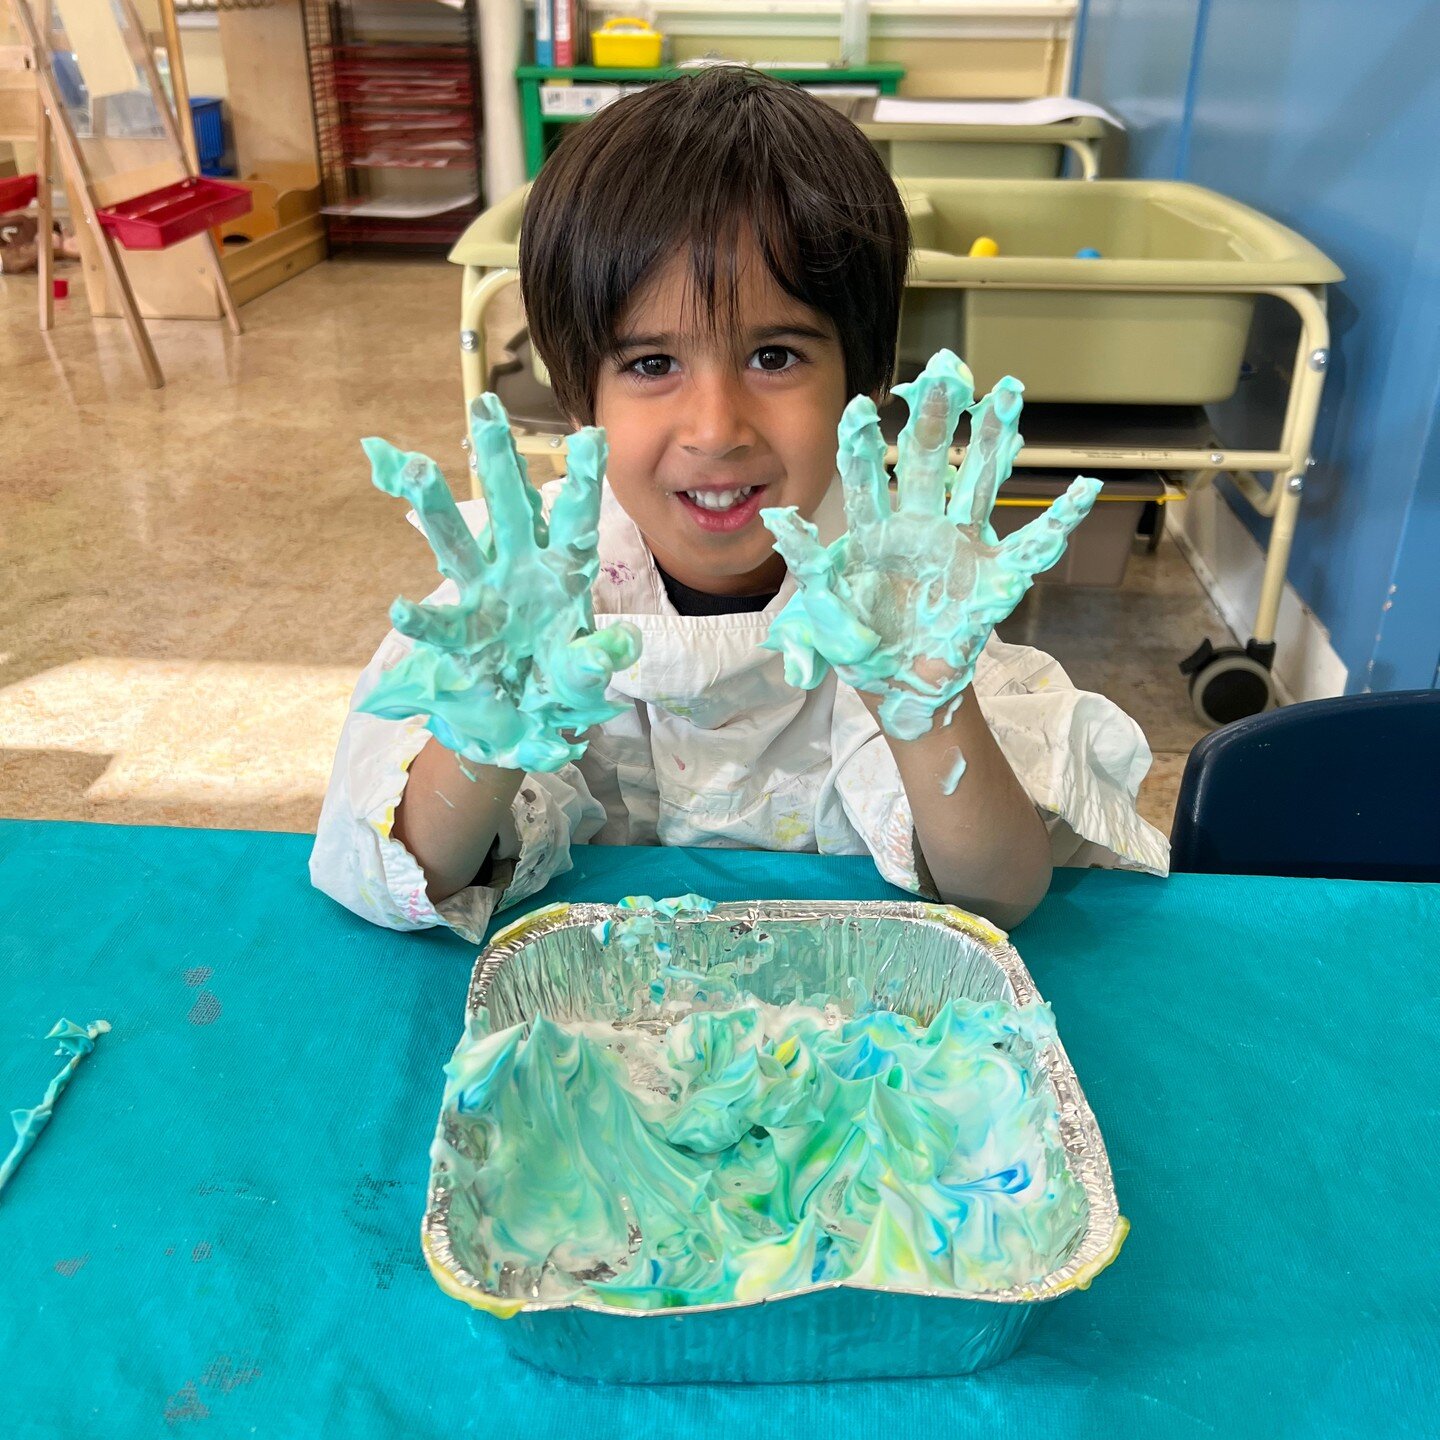 Getting our hands dirty and loving it! What a great way to spend the morning and learn at playschool!

Make sure your kids get their spot, the Tuesday/Thursday class still has openings, and there are a few 5-day spots still open.

Registration for 20